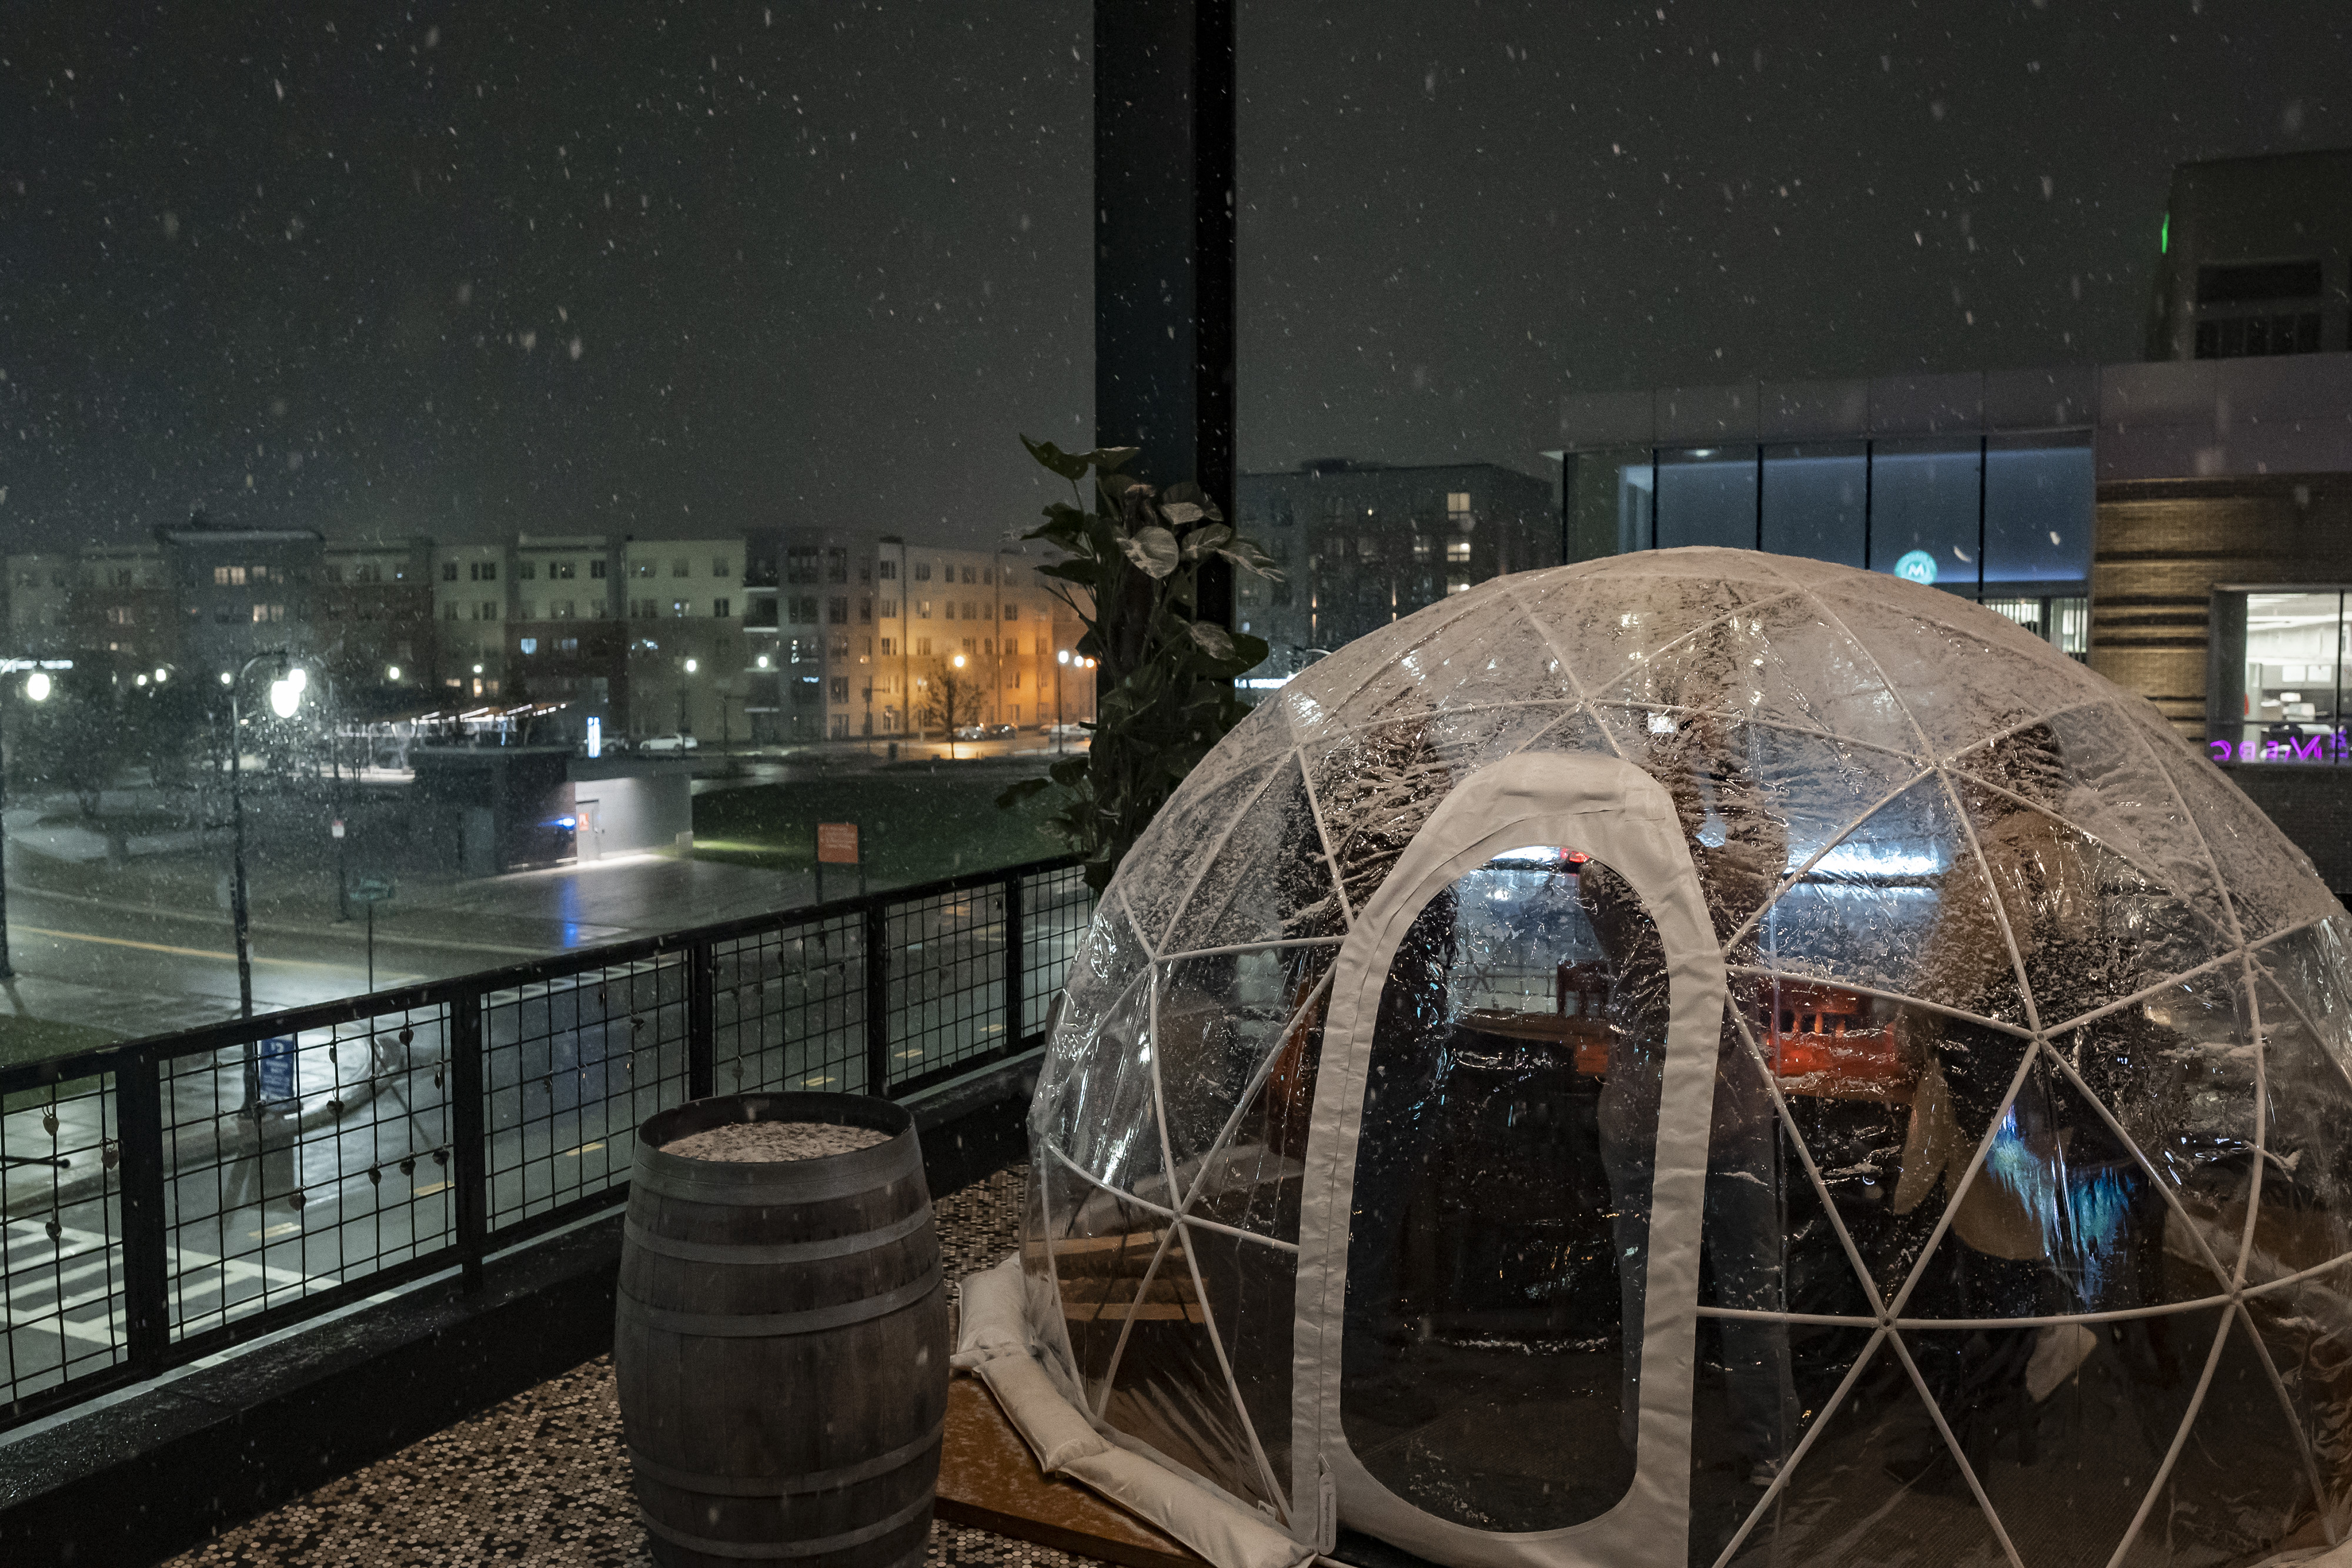 Nortons Brewing Company's garden igloos are back for a unique outdoor  experience